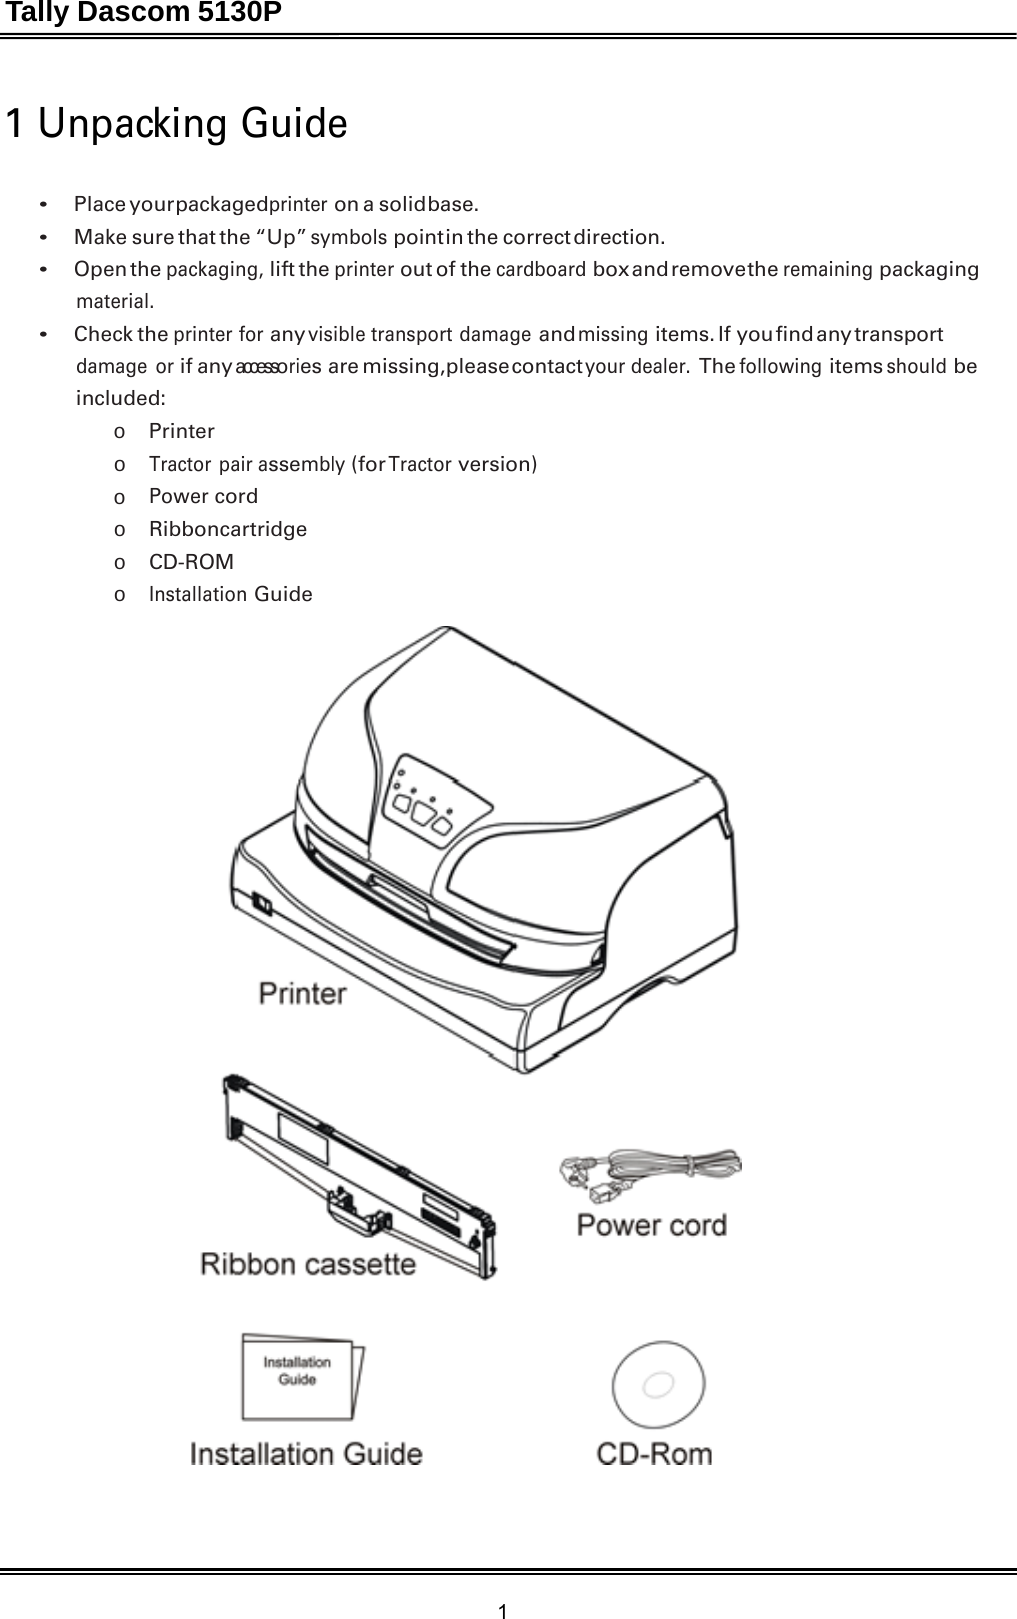 Tally Dascom 5130P 1  1 Unpacking Guide   • Place your packagedprinter on a solid base. • Make sure that the “Up” symbols point in the  correct  direction. • Open the packaging, lift the printer out of the cardboard box and remove the remaining packaging material. • Check the printer for any visible transport damage and missing items. If  you find any transport damage or if any accessories are missing, please contact your dealer. The following items should be included: o  Printer o Tractor pair assembly (for Tractor version) o Power cord o  Ribbon cartridge o  CD-ROM o Installation Guide   